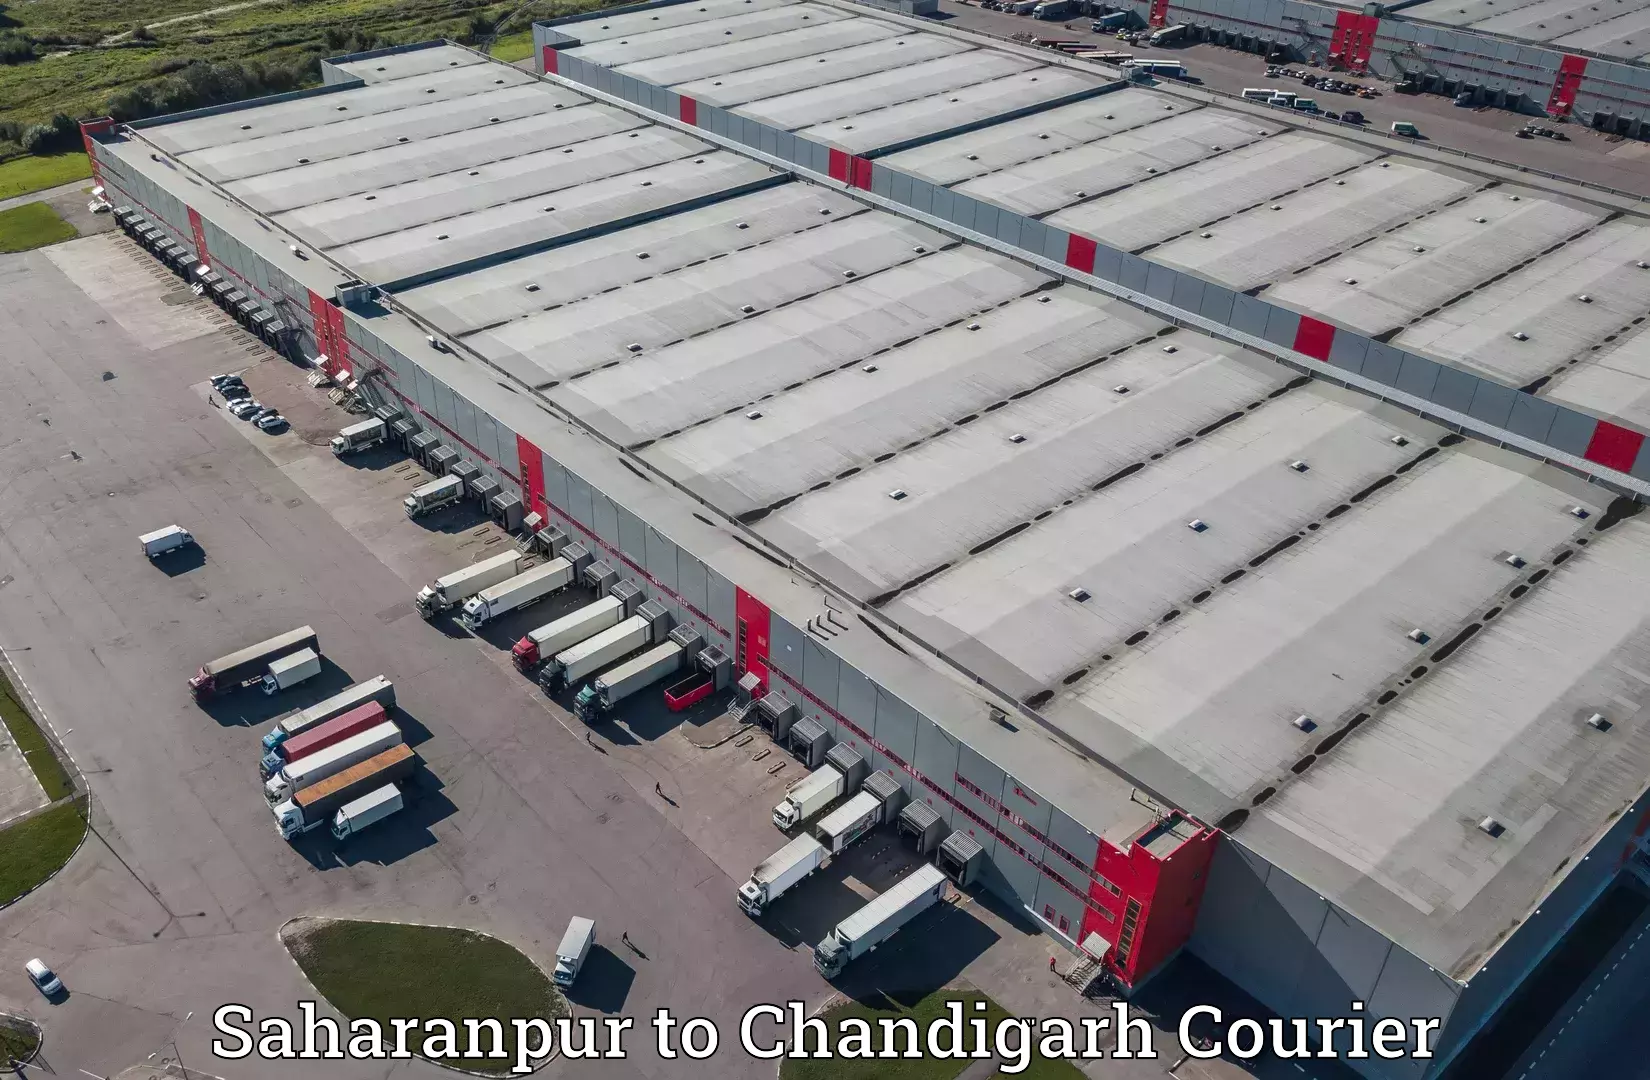 High-speed parcel service Saharanpur to Chandigarh